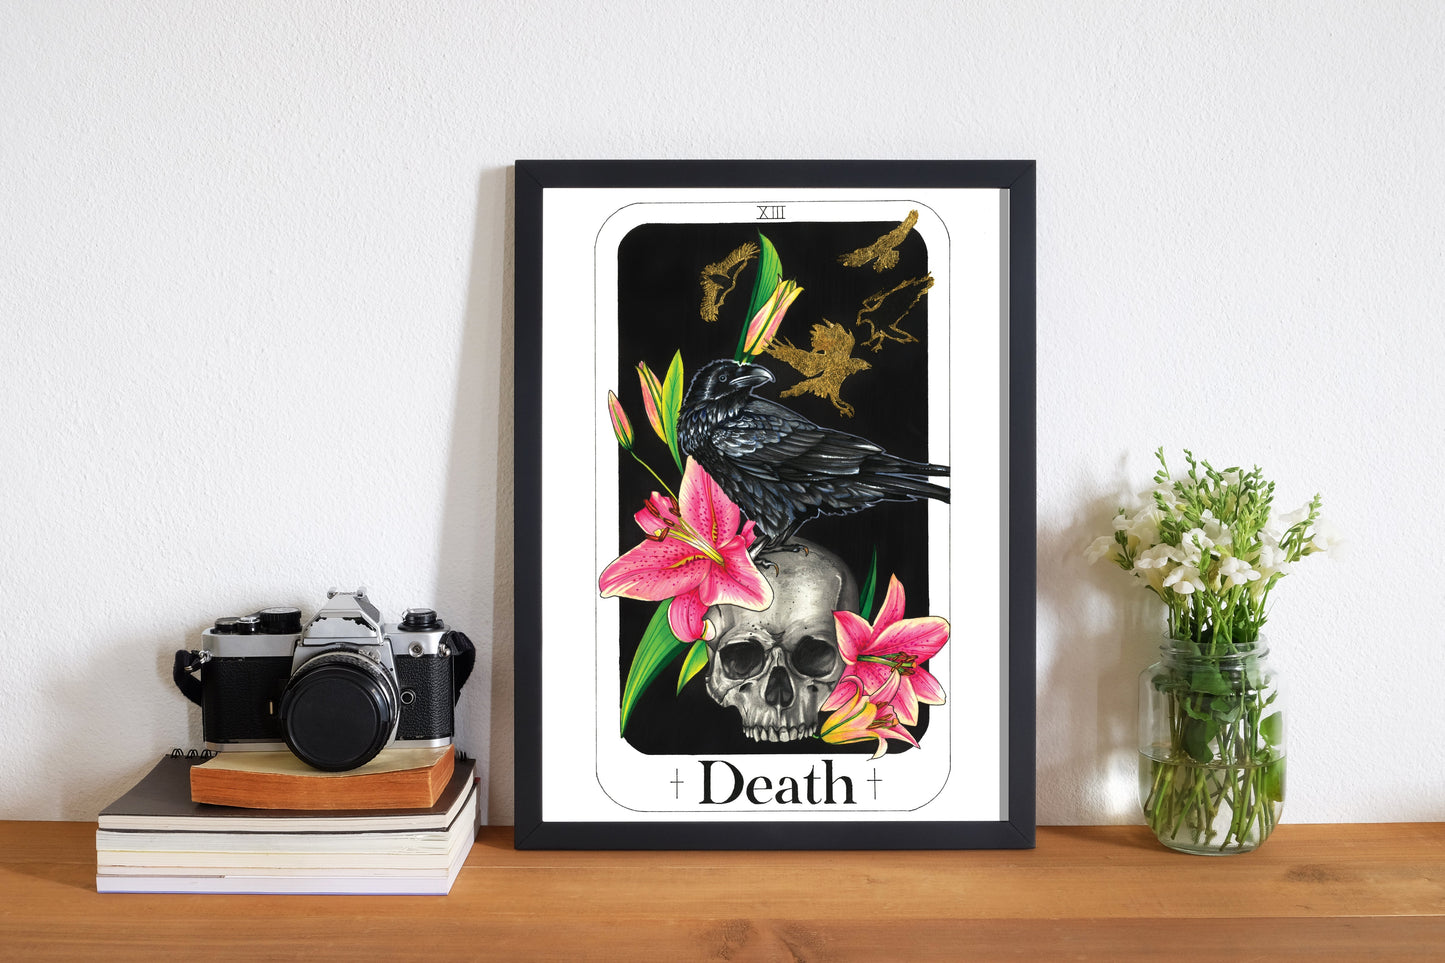 Imperfectly Perfect "Death" Tarot Card (50% off, slight damage)